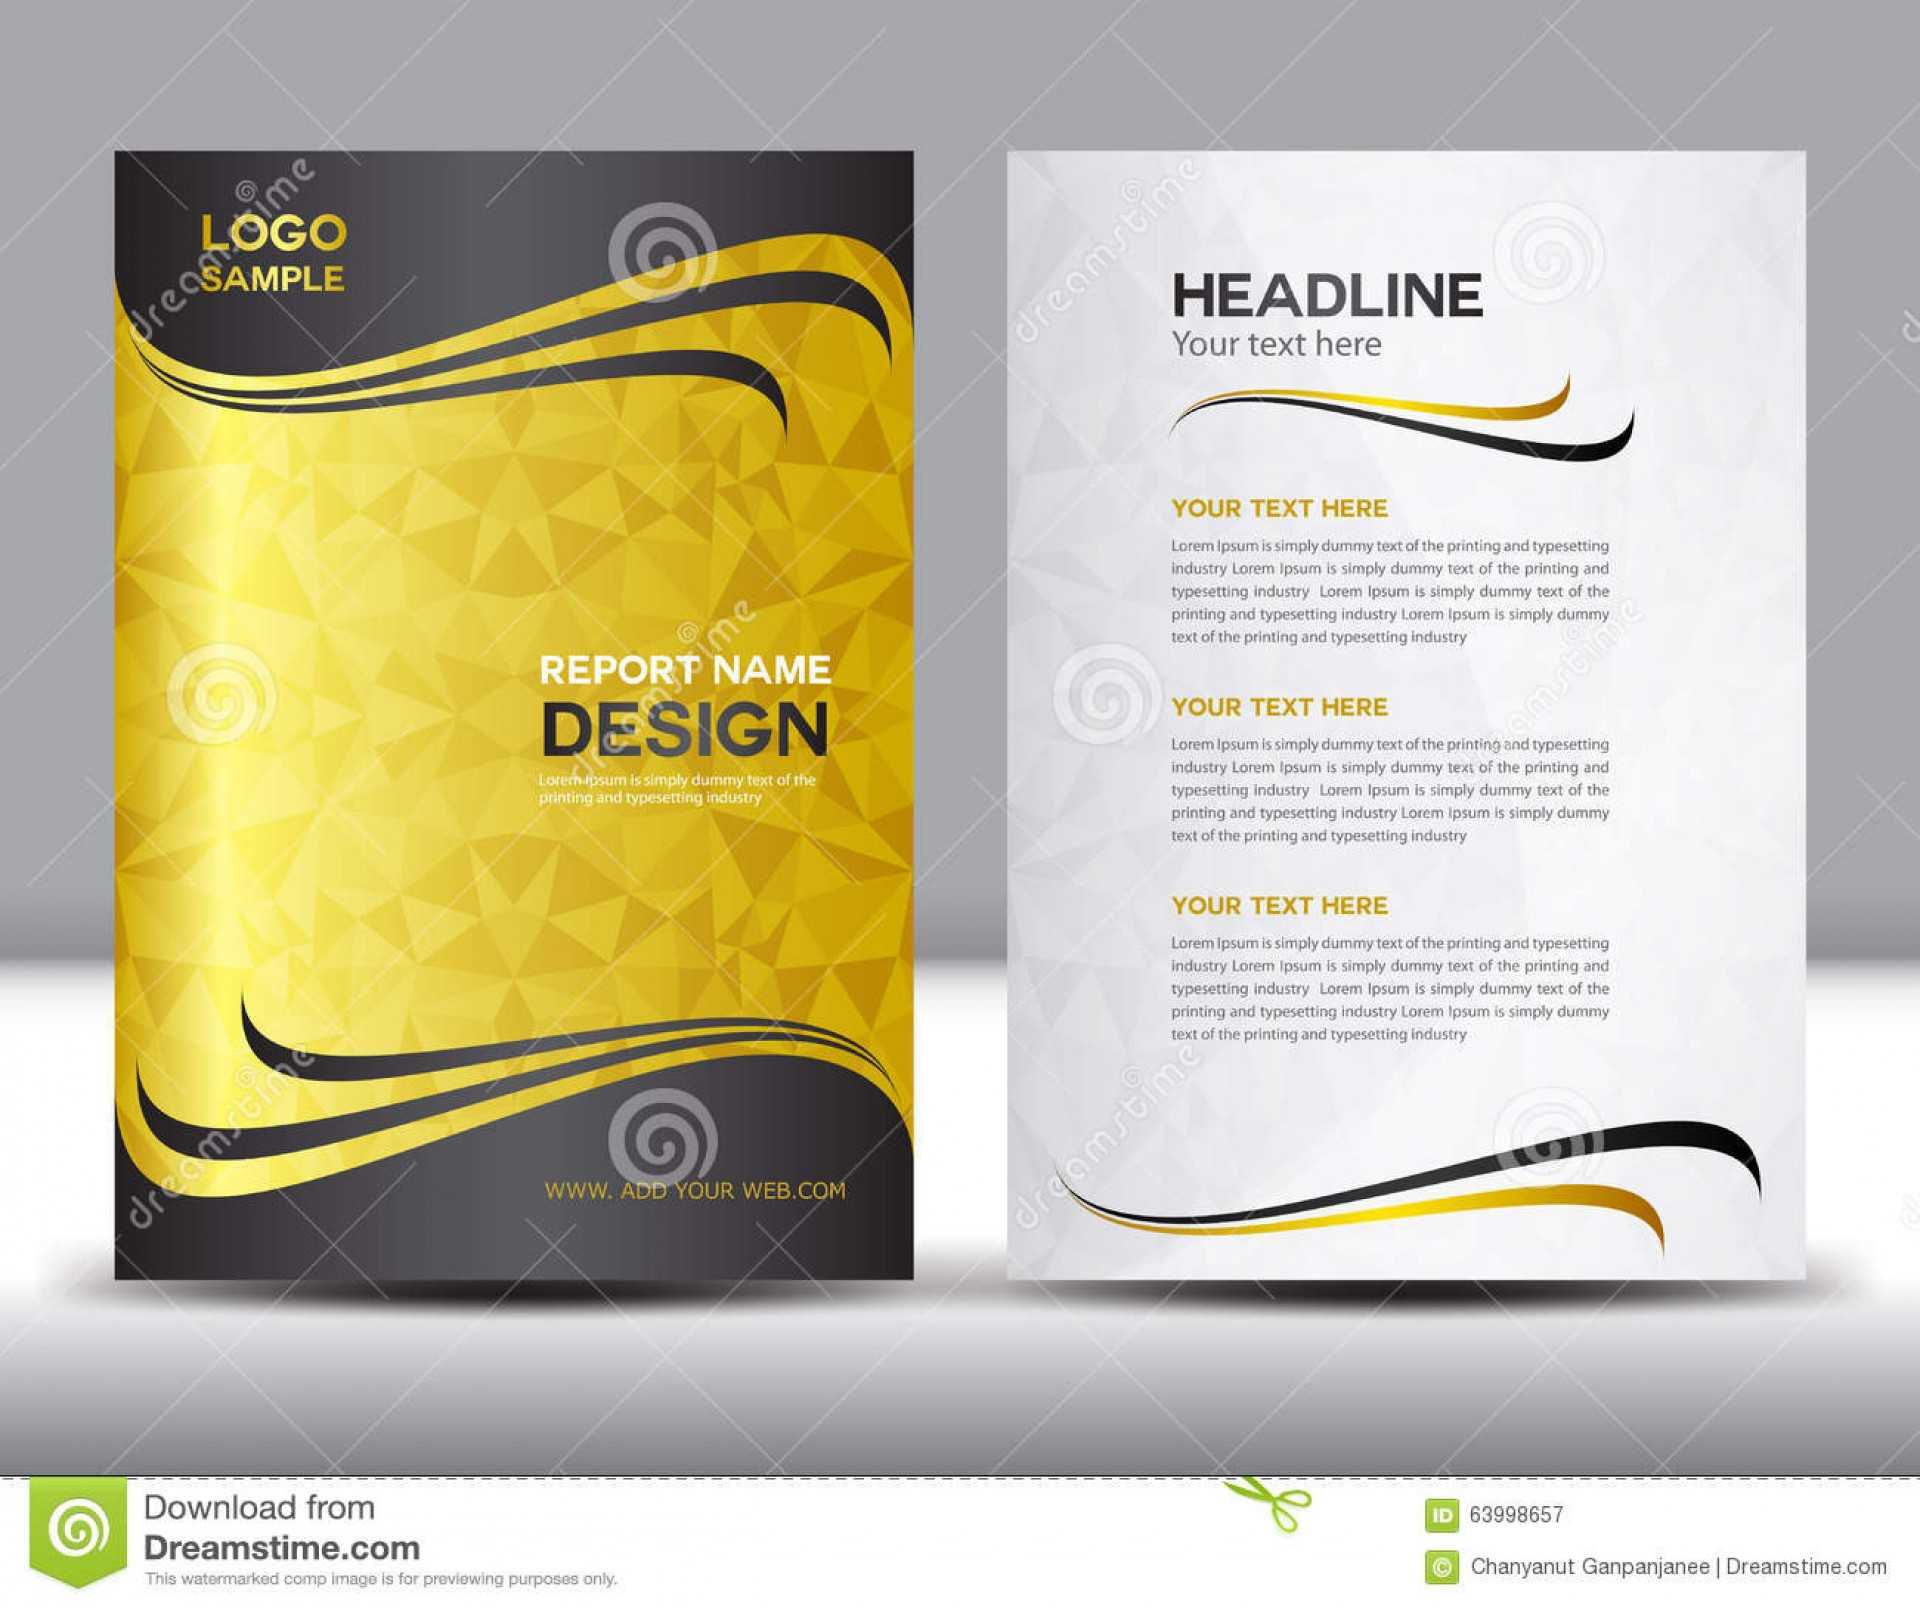 021 Flyer Design Samples Free Download Gold Cover Annual Intended For Illustrator Report Templates